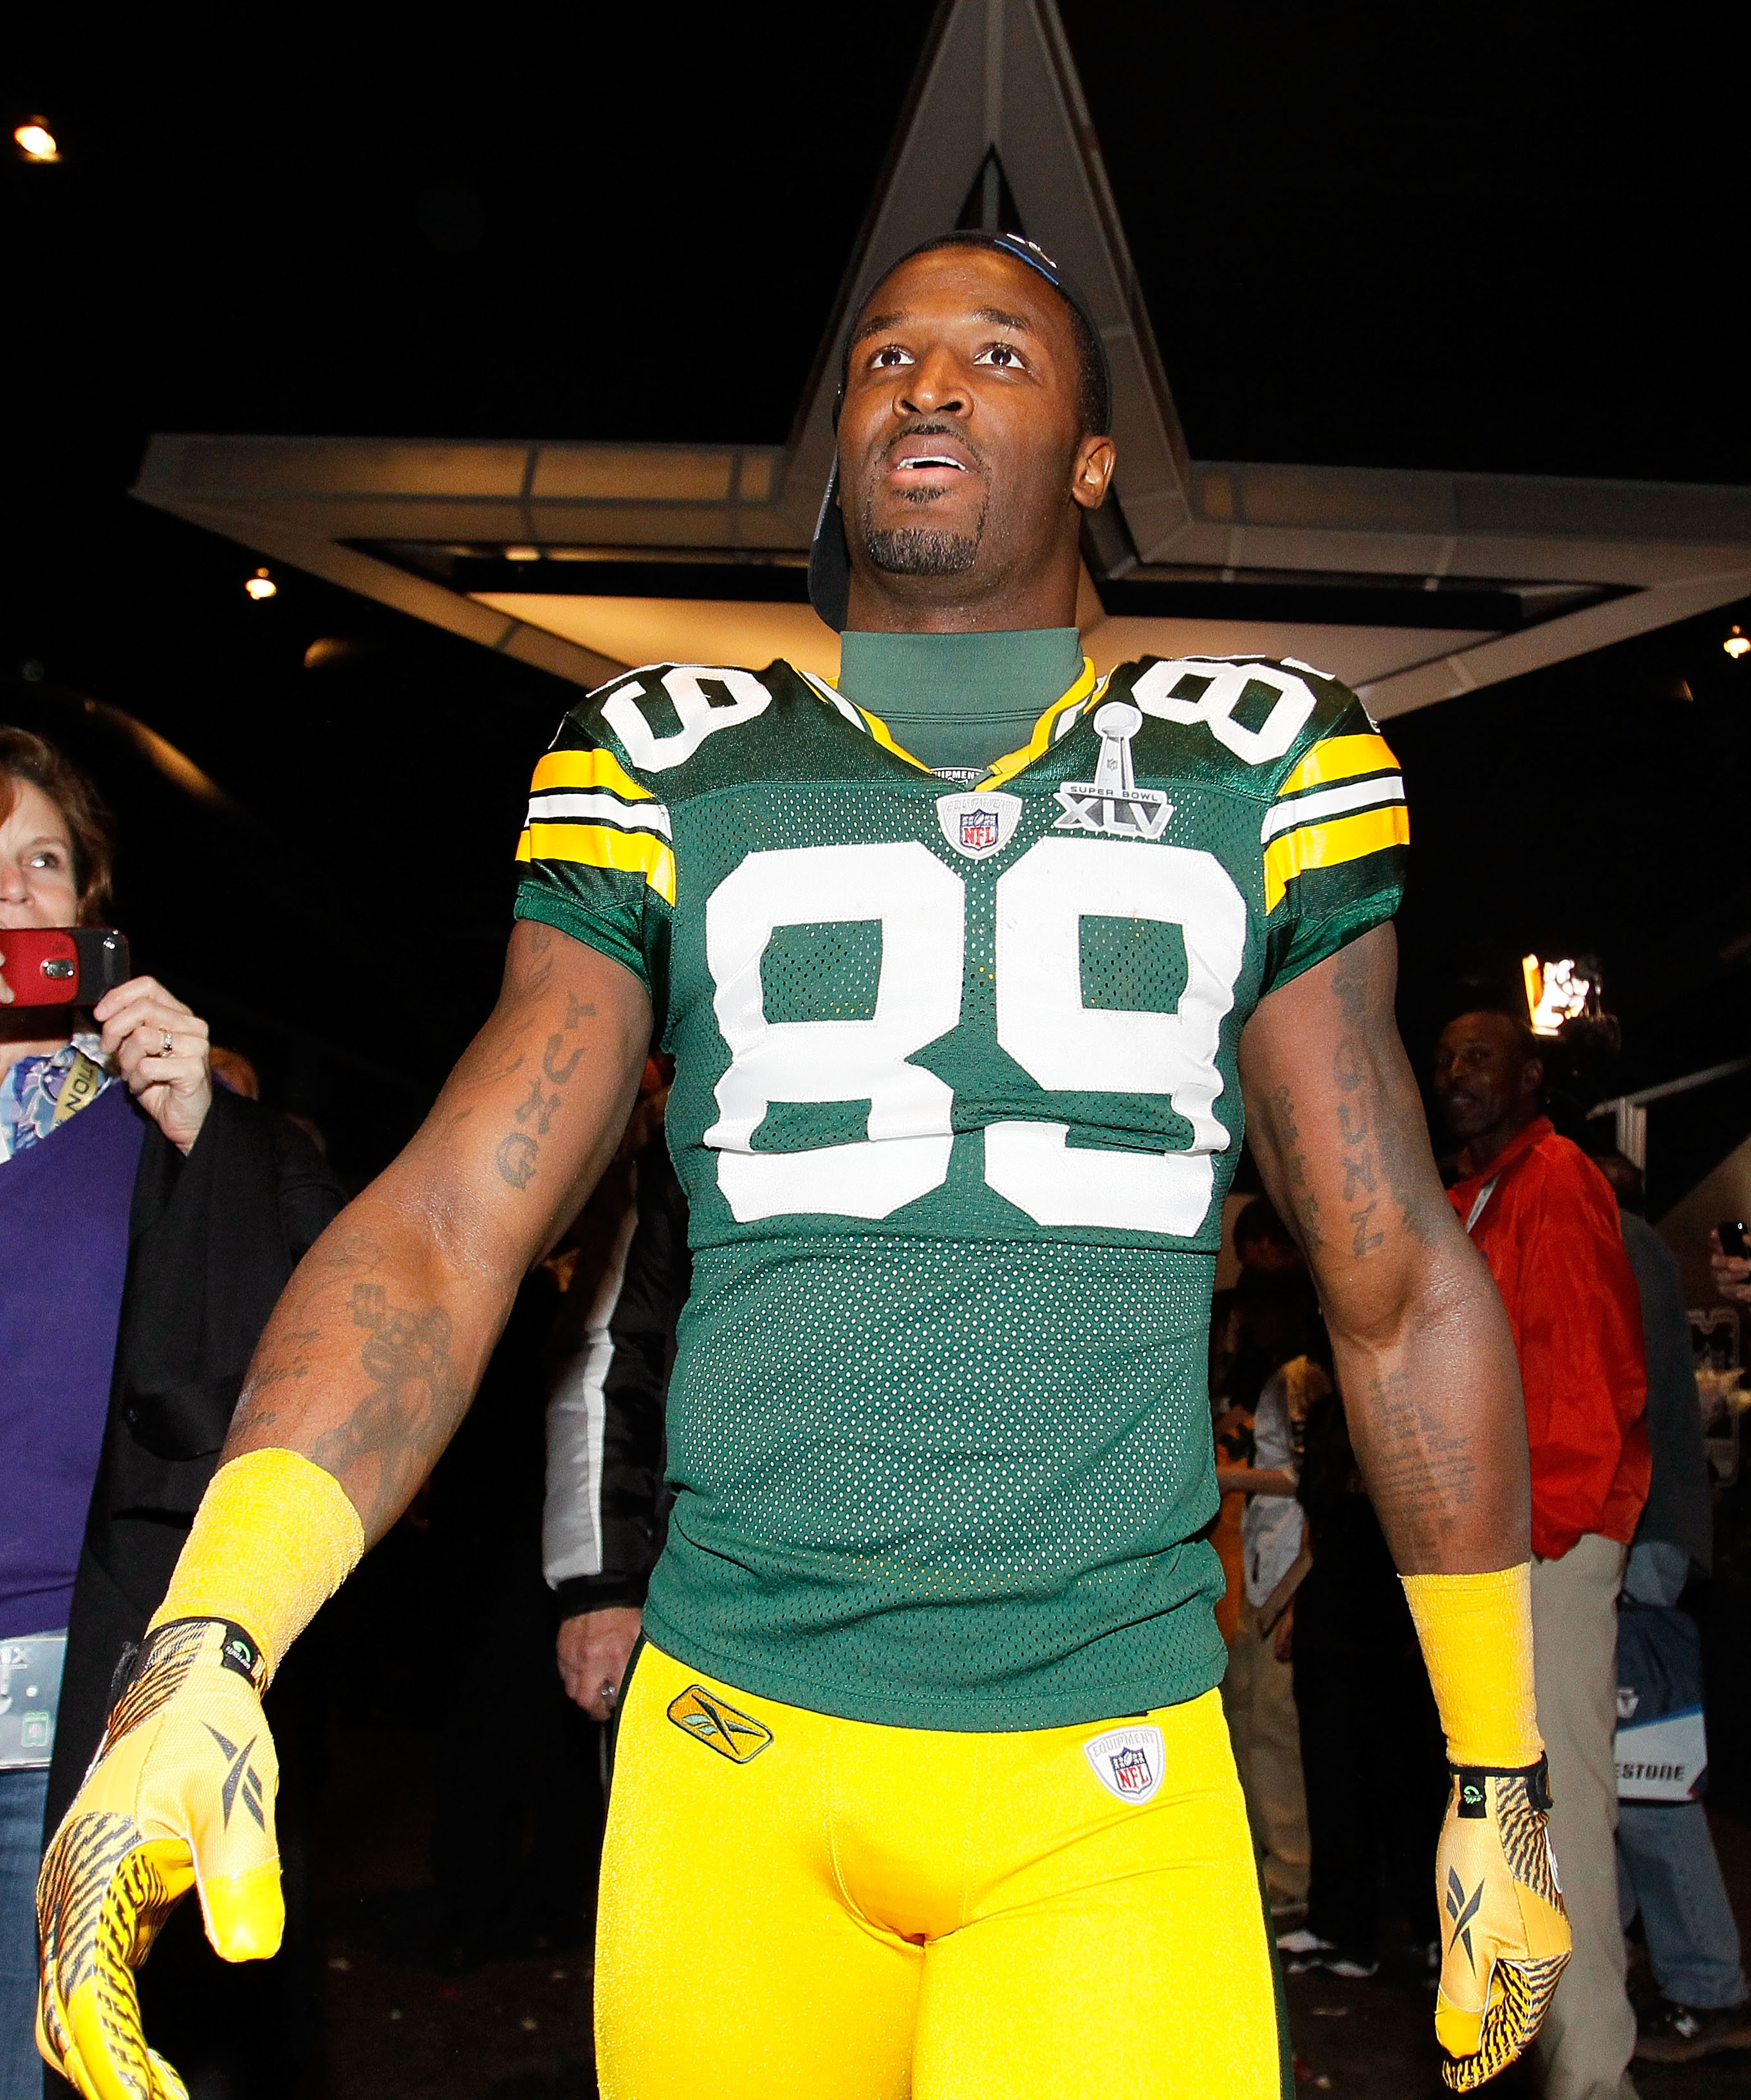 ARLINGTON, TX - FEBRUARY 06:  James Jones #89 of the Green Bay Packers celebrates after the Packers defeated the Pittsburgh Steelers 31-25 during Super Bowl XLV at Cowboys Stadium on February 6, 2011 in Arlington, Texas.  (Photo by Kevin C. Cox/Getty Imag